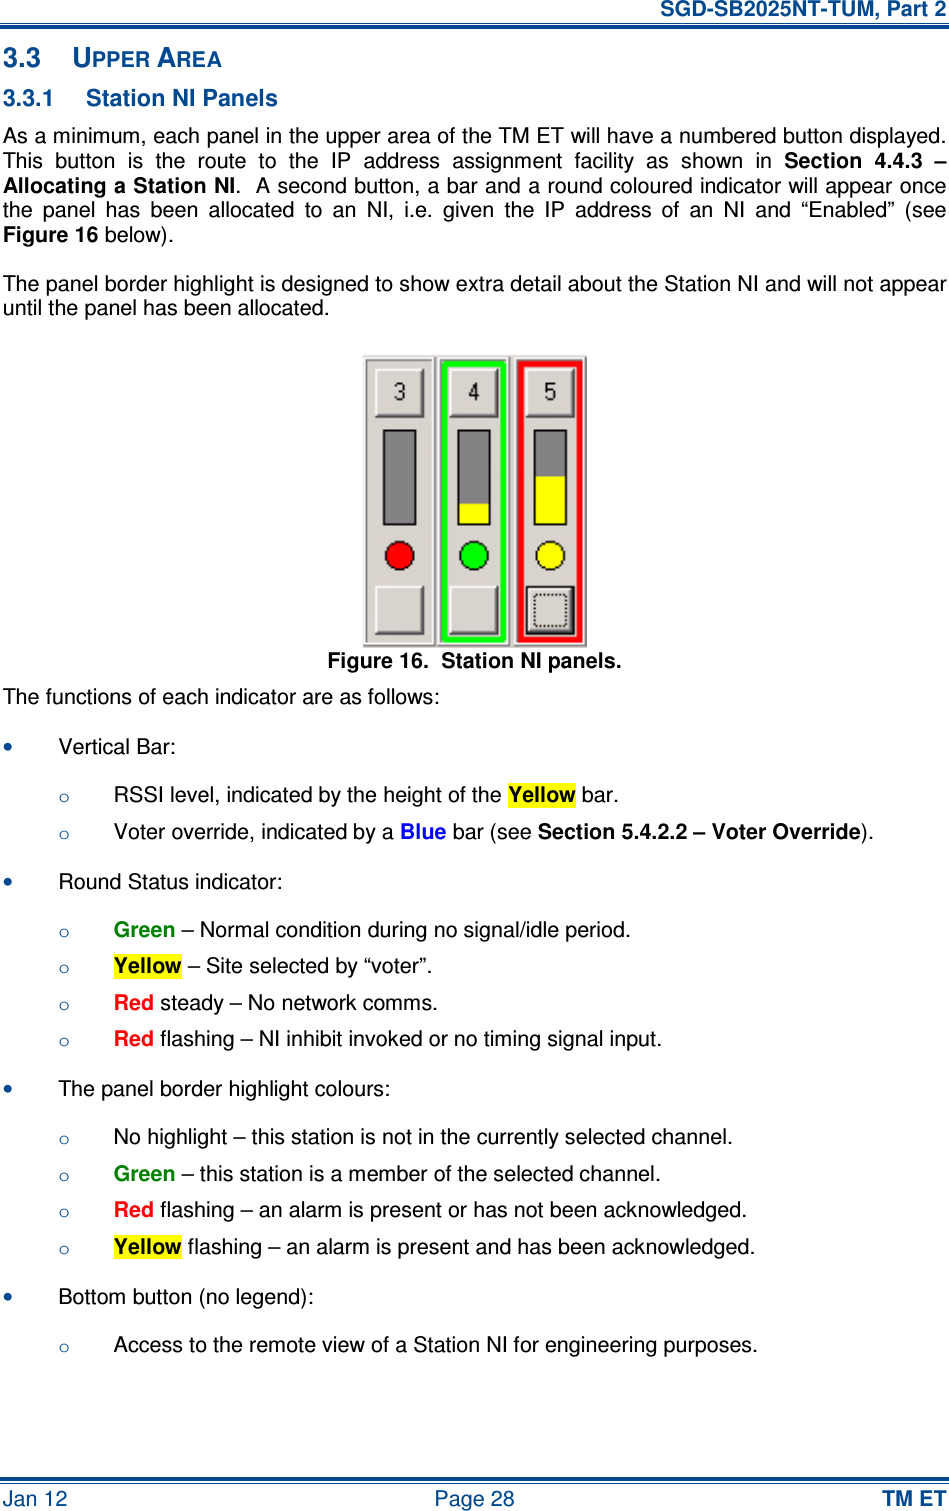   SGD-SB2025NT-TUM, Part 2 Jan 12  Page 28 TM ET 3.3  UPPER AREA 3.3.1  Station NI Panels As a minimum, each panel in the upper area of the TM ET will have a numbered button displayed.  This  button  is  the  route  to  the  IP  address  assignment  facility  as  shown  in Section  4.4.3  – Allocating a Station NI.  A second button, a bar and a round coloured indicator will appear once the  panel  has  been  allocated  to  an  NI,  i.e.  given  the  IP  address  of  an  NI  and  “Enabled”  (see Figure 16 below). The panel border highlight is designed to show extra detail about the Station NI and will not appear until the panel has been allocated. Figure 16.  Station NI panels. The functions of each indicator are as follows: • Vertical Bar: o RSSI level, indicated by the height of the Yellow bar. o Voter override, indicated by a Blue bar (see Section 5.4.2.2 – Voter Override). • Round Status indicator: o Green – Normal condition during no signal/idle period. o Yellow – Site selected by “voter”. o Red steady – No network comms. o Red flashing – NI inhibit invoked or no timing signal input. • The panel border highlight colours: o No highlight – this station is not in the currently selected channel. o Green – this station is a member of the selected channel. o Red flashing – an alarm is present or has not been acknowledged. o Yellow flashing – an alarm is present and has been acknowledged. • Bottom button (no legend): o Access to the remote view of a Station NI for engineering purposes. 